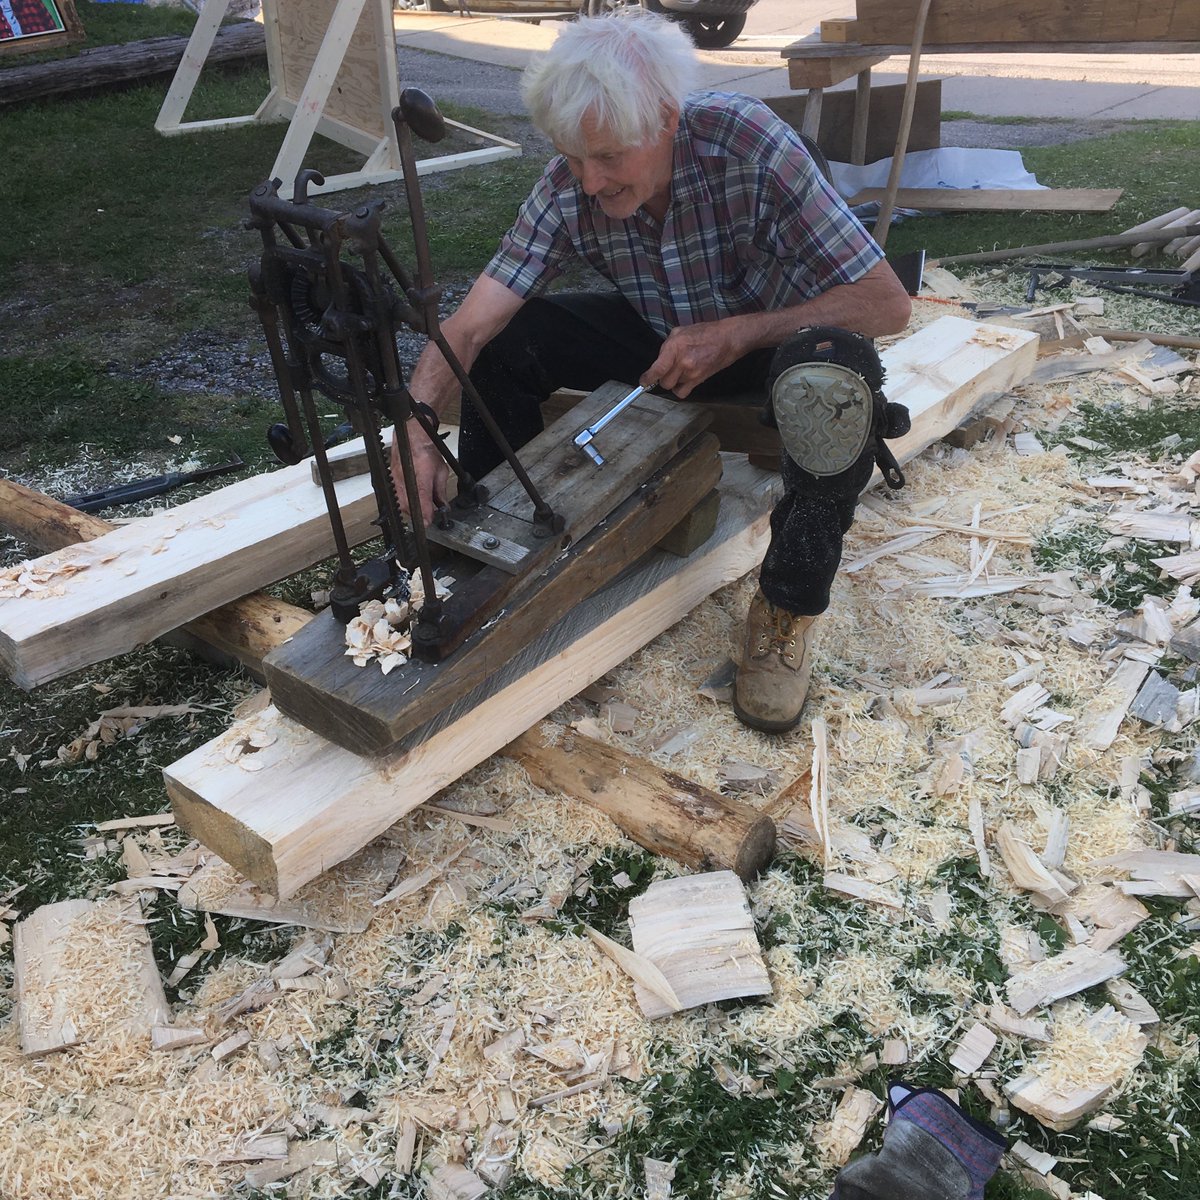 Local treasure, John Foreman, hewing logs at Maynooth Madness

#traditionalskills #woodworking #logbuilding
#offgrid #heritagewoodworking #builtbyhand